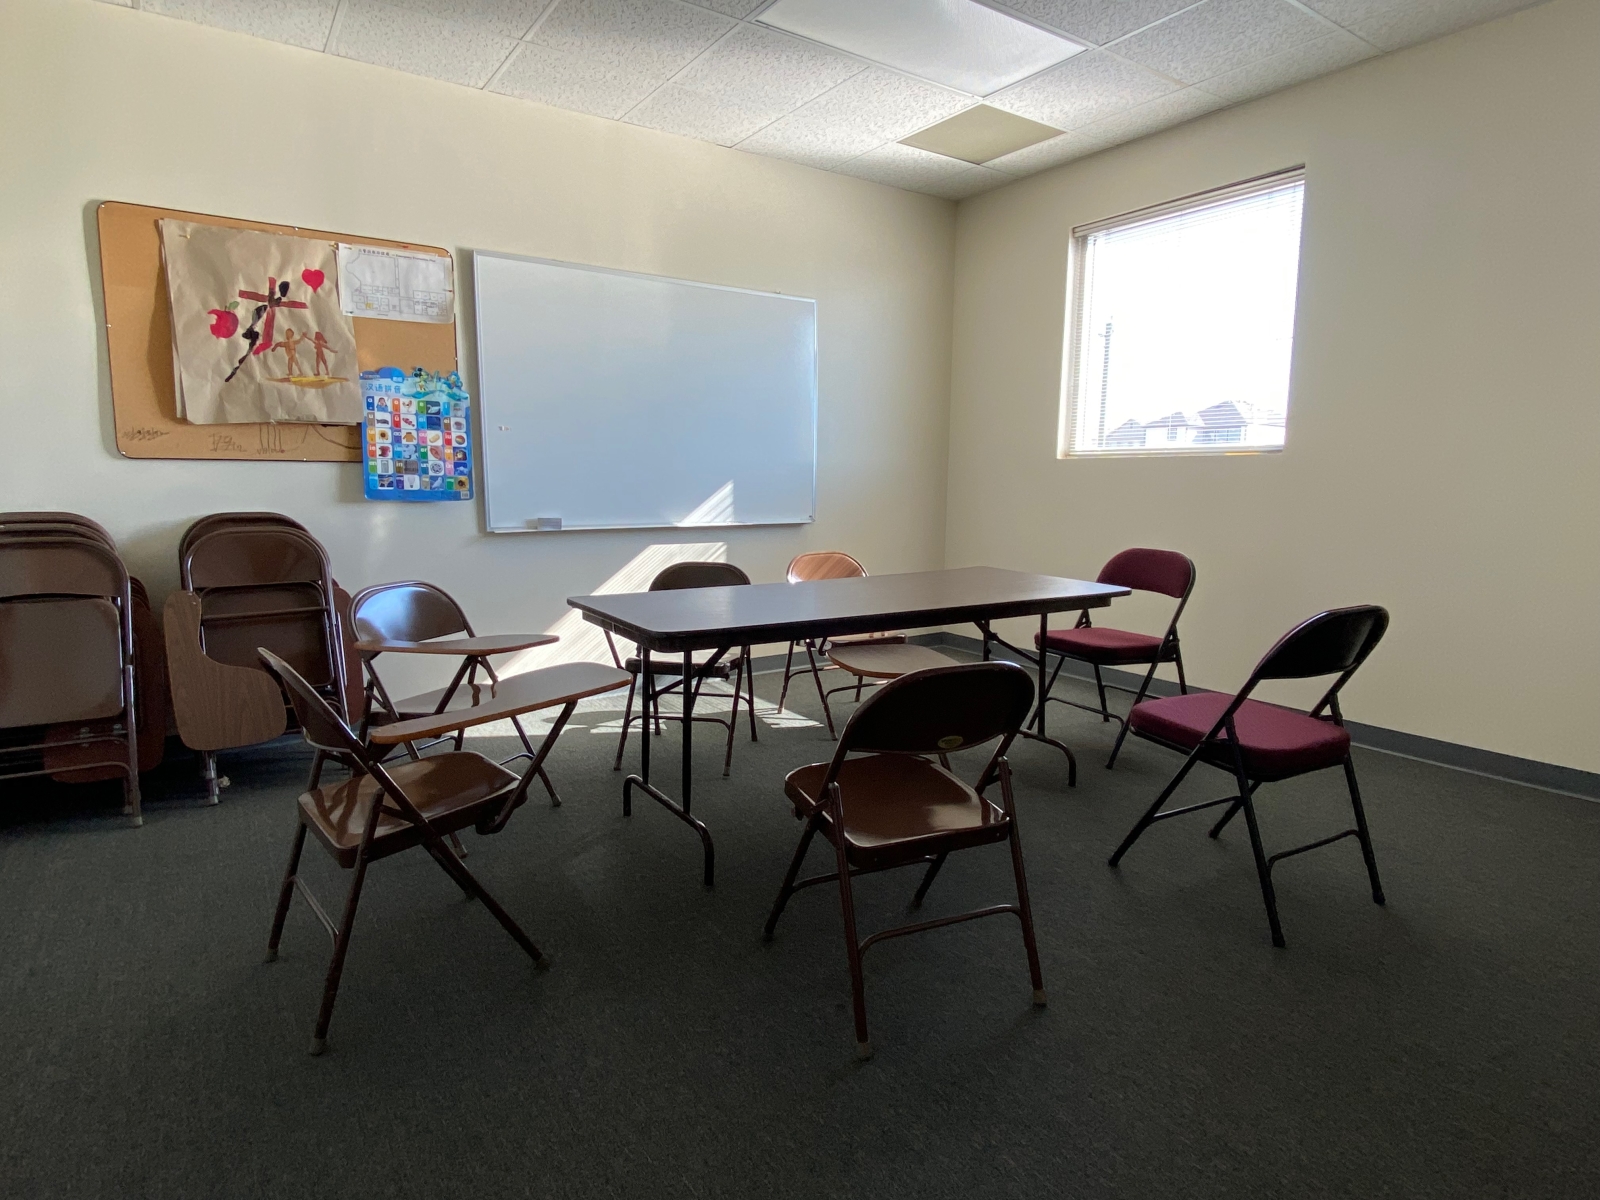 Room 218A has a whiteboard, a table, and some student desks.